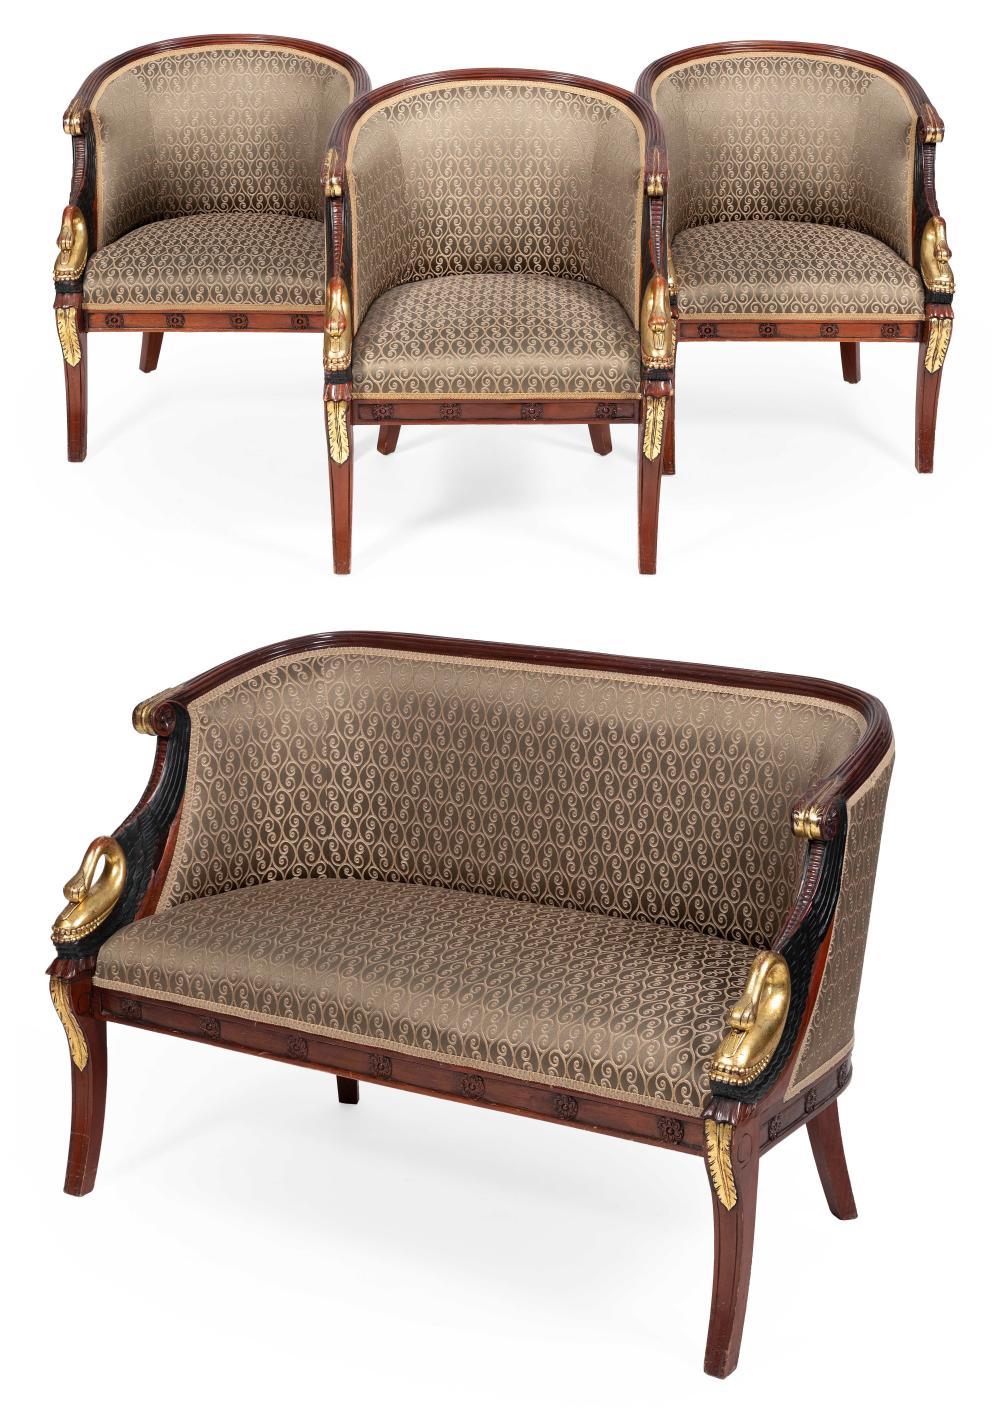 EMPIRE STYLE SETTEE AND THREE CHAIRS 34be5d